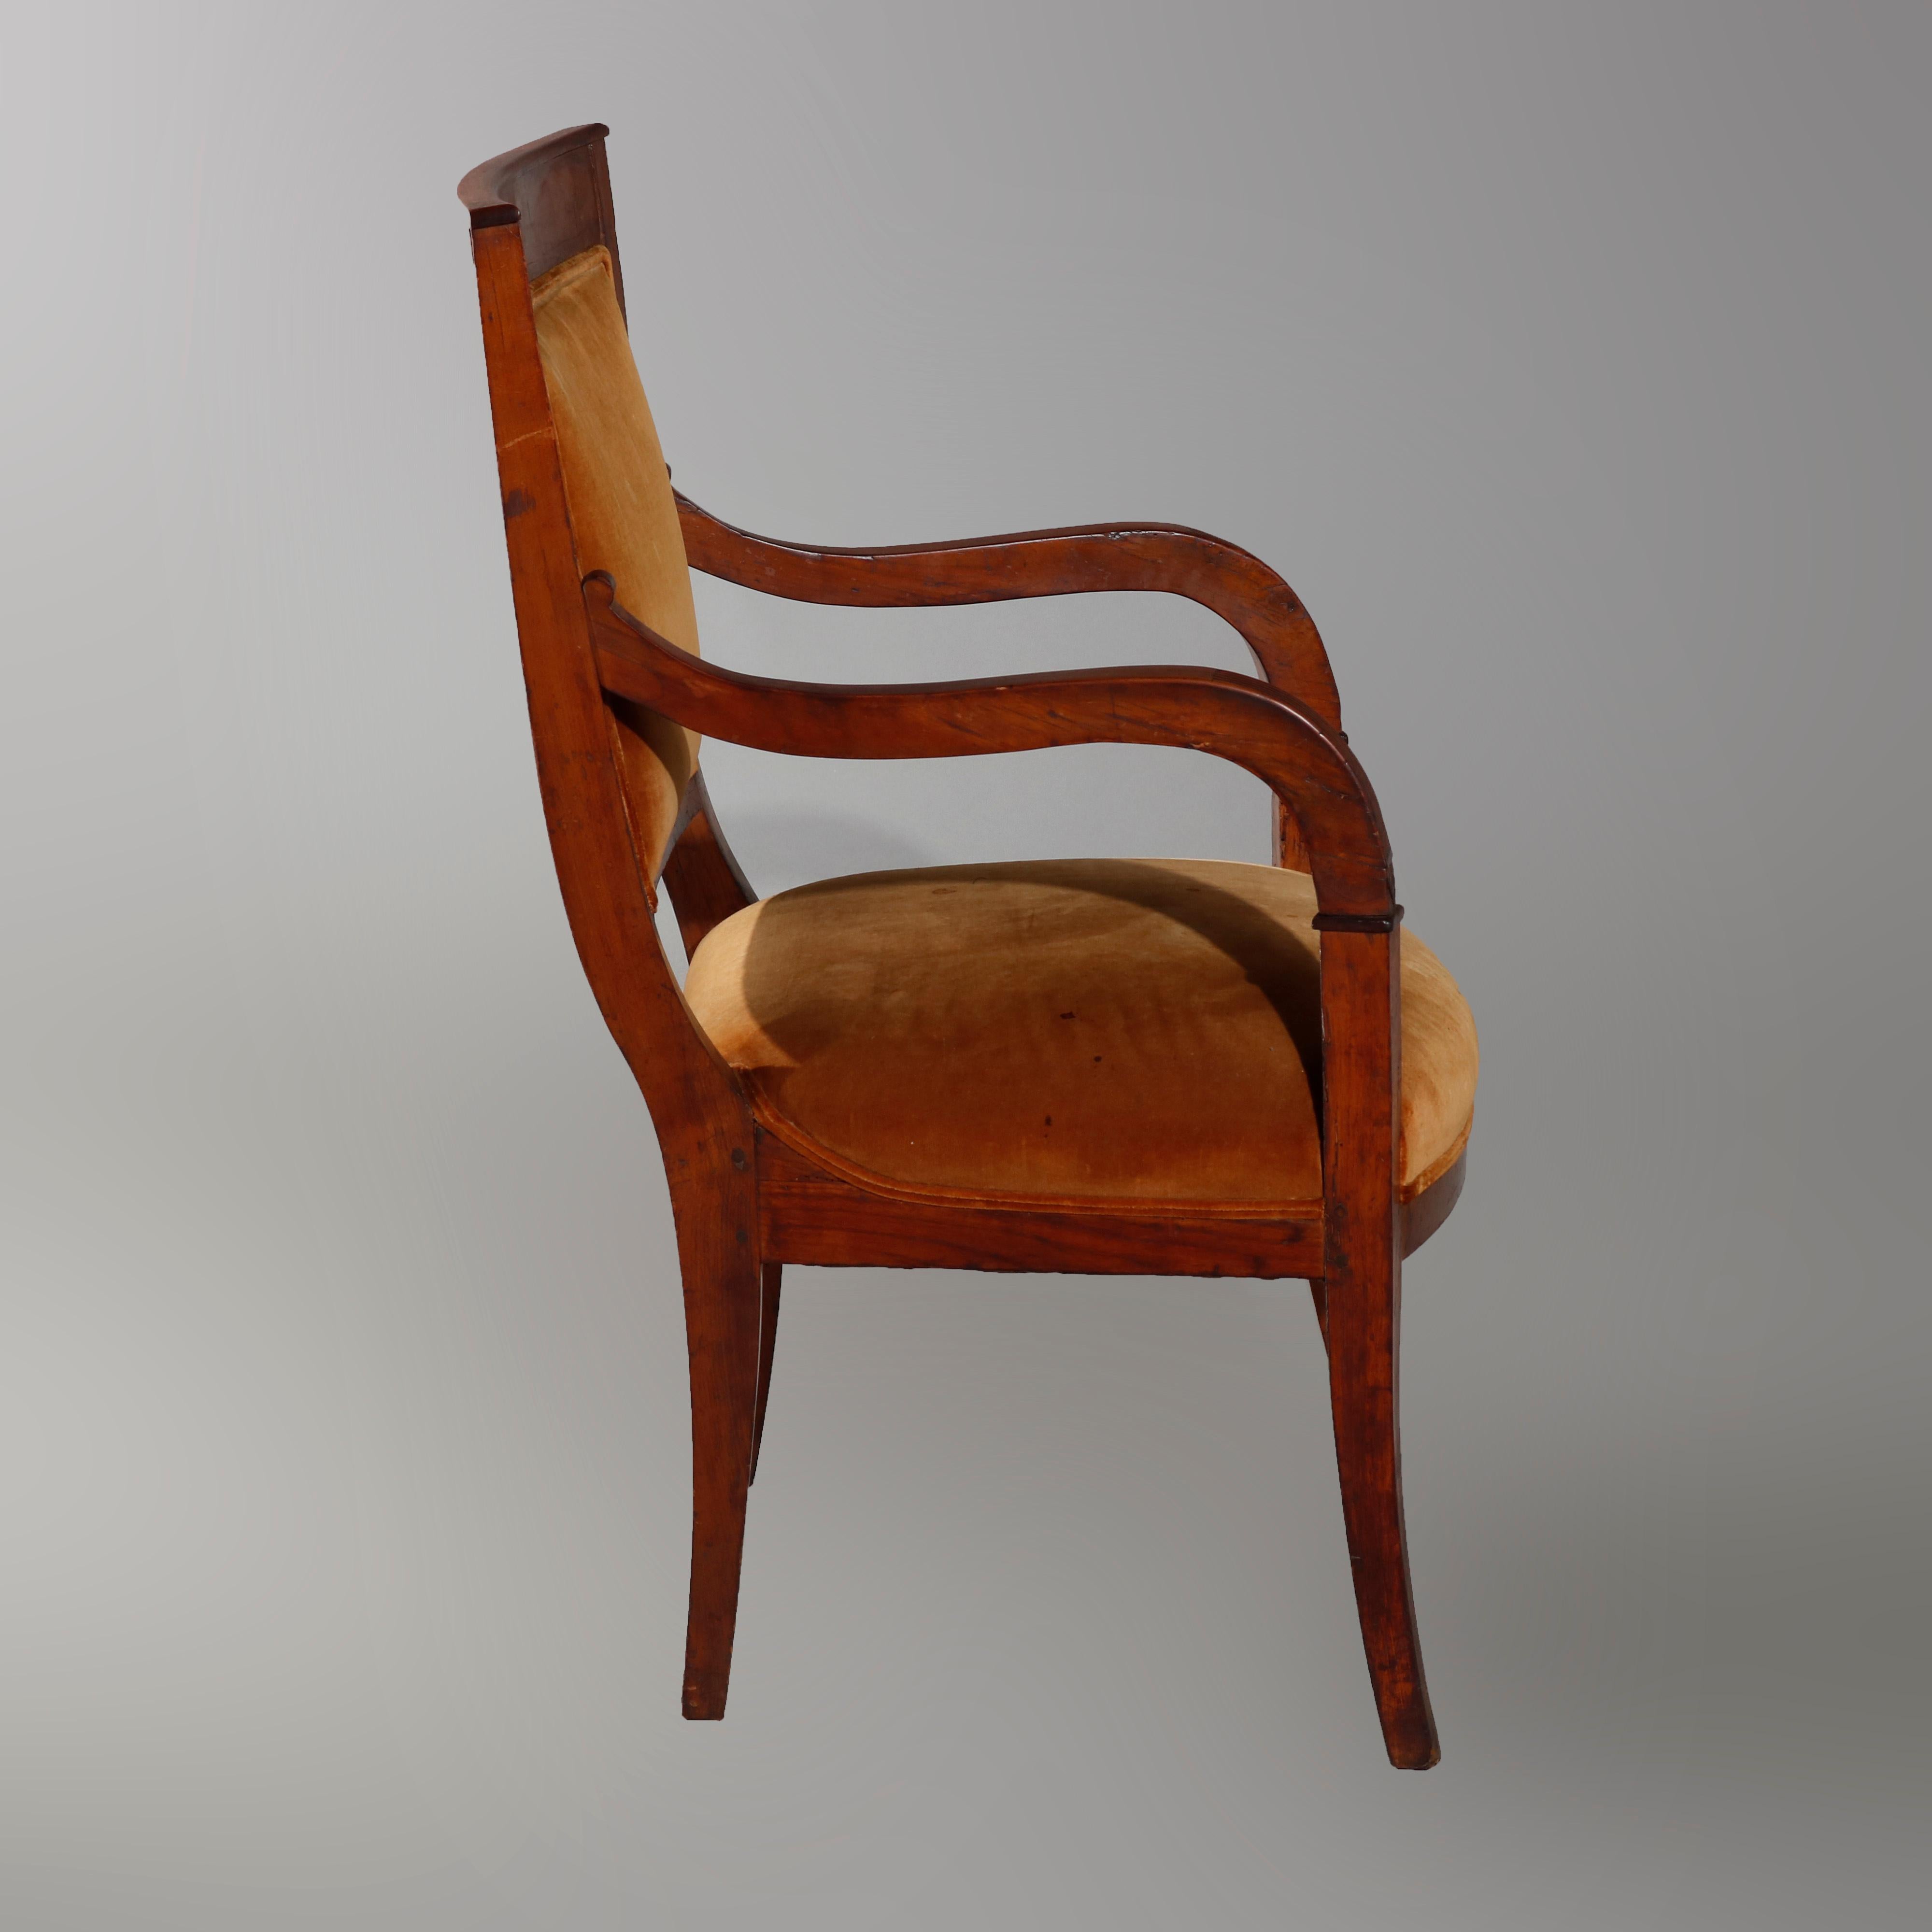 An antique Biedermeier armchair offers walnut frame with upholstered back and seat, S-scroll and reeded arms, raised on slightly flared and square legs, circa 1820

Measures: 35